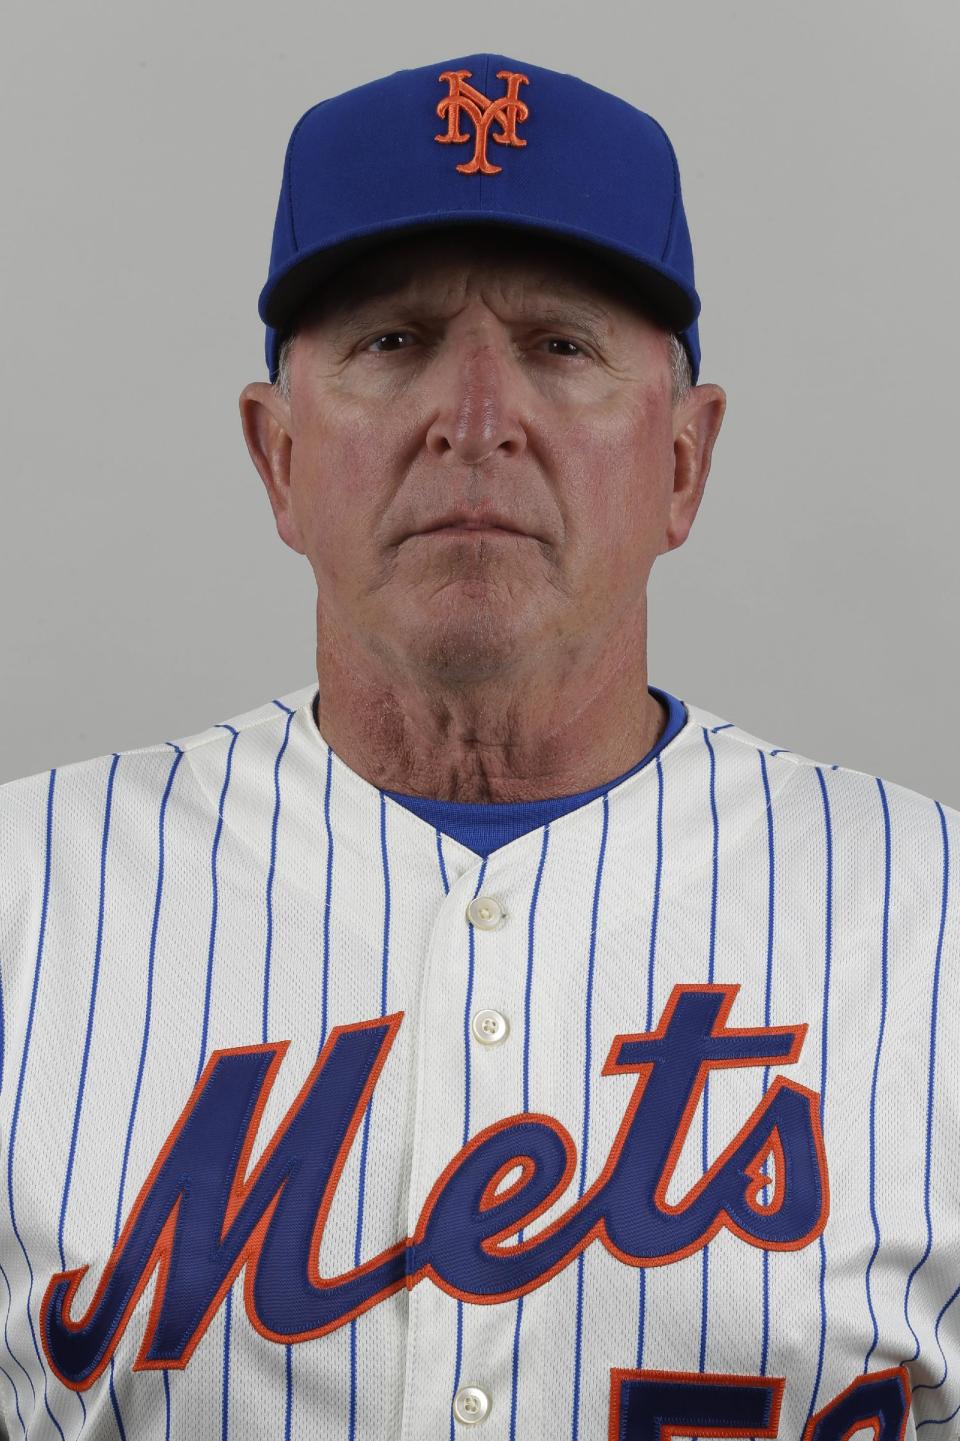 FILE - This is a Feb. 19, 2013 file photo showing New York Mets pitching coach Dan Warthen posed at spring training in Port St. Lucie, Fla. Warthen and the Mets apologized after the team's pitching coach used a racial slur in describing the translator for New York pitcher Daisuke Matsuzaka. "I apologize for the thoughtless remarks that I made yesterday in the clubhouse," Warthen said in statement released by the team Wednesday, March 12, 2014. (AP Photo/Julio Cortez, File)